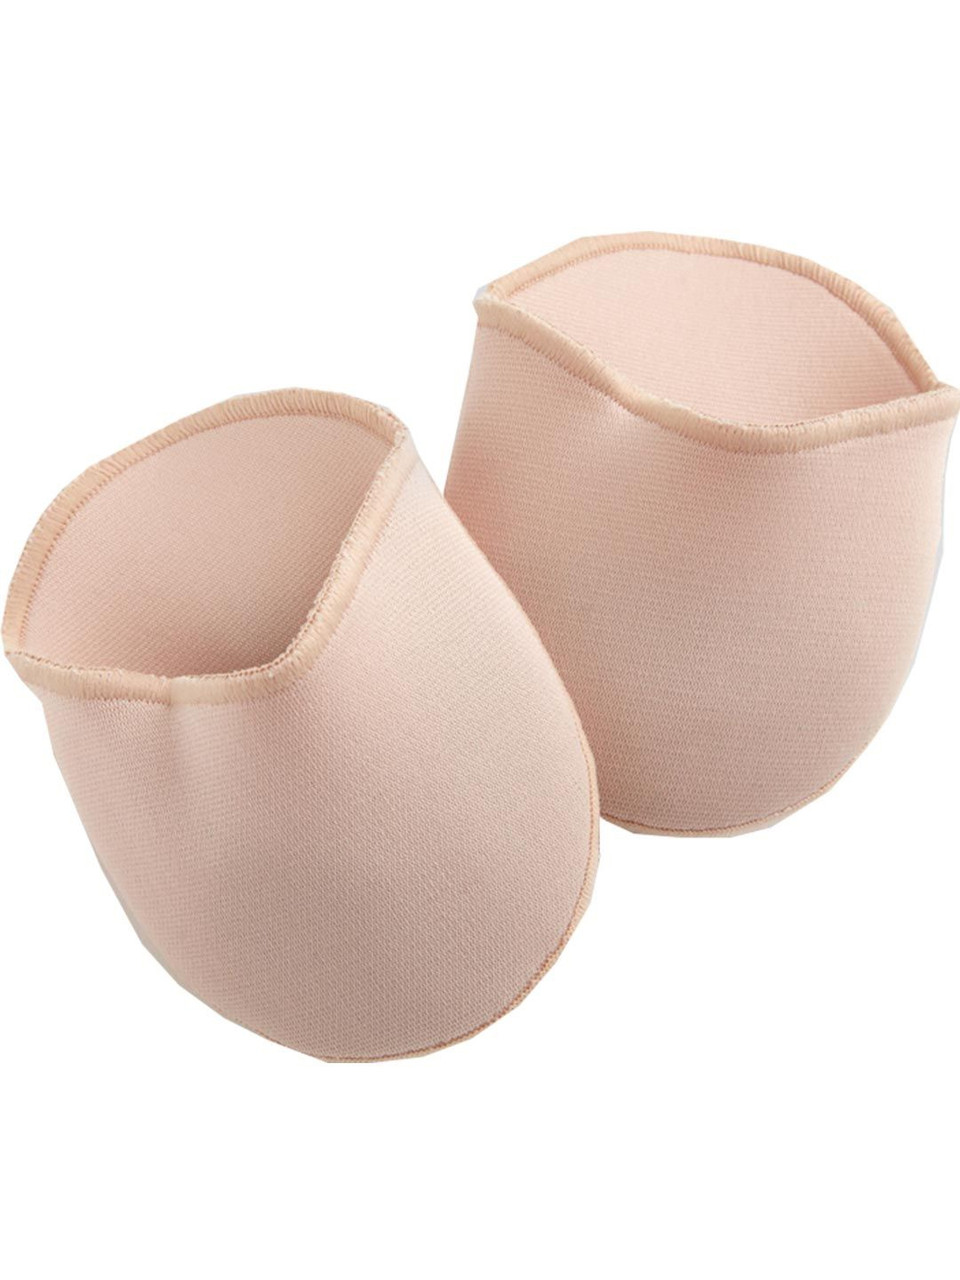 EMBOUTS PROTECTION PIEDS & POINTES BUNHEADS OUCH POUCH JR Référence BH1094  et BH1095